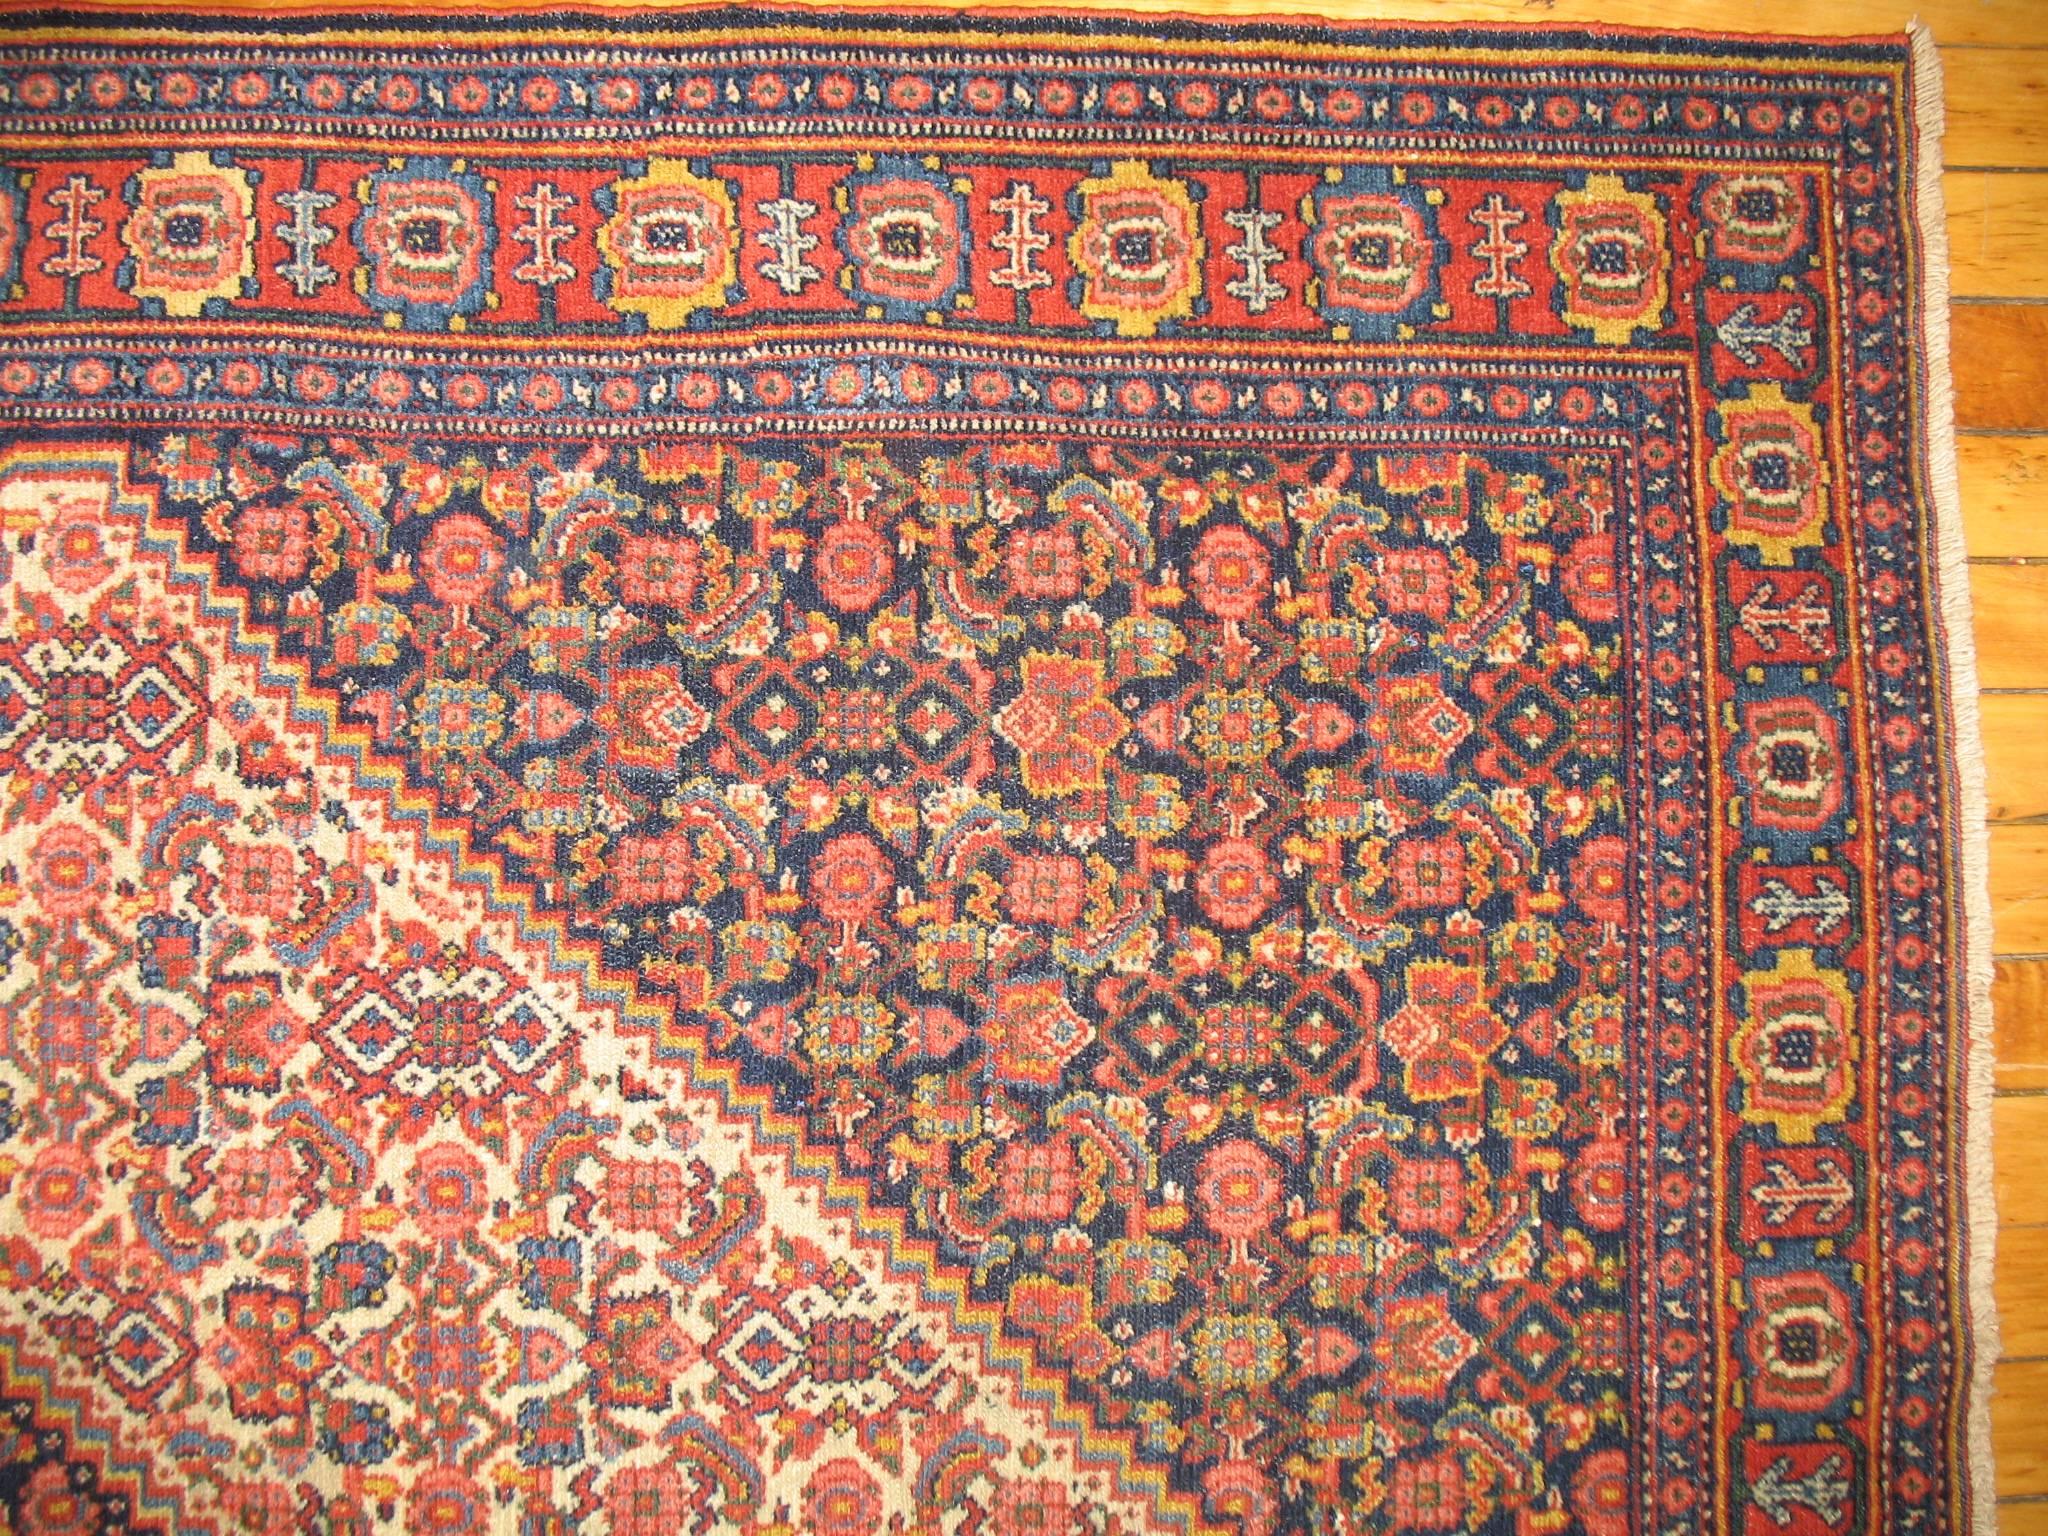 
Antique Senneh rugs come from the Northwest region of Iran and the construction provides insight into the elegance of French tapestries. These rugs are the thinnest of Persian rugs, often with a single layer. They range in color from brilliant to